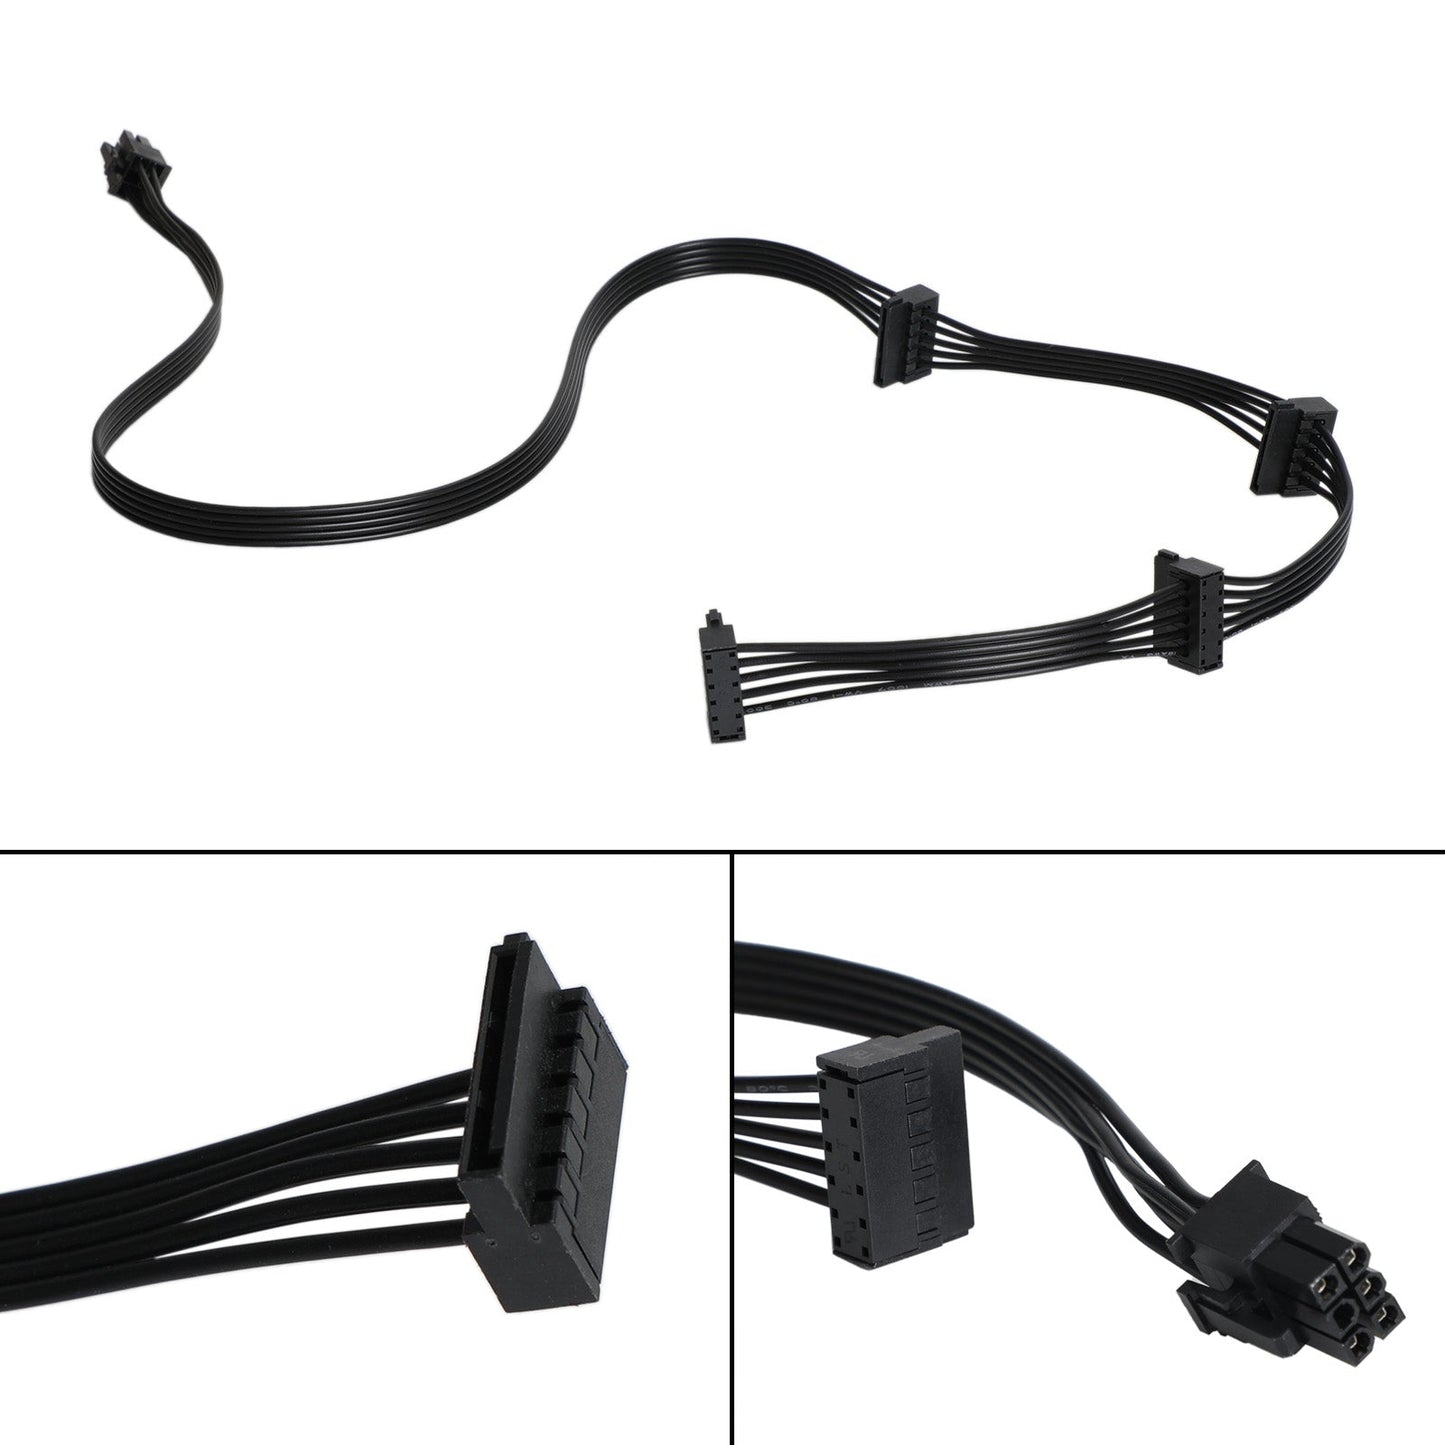 1 PC Cable PCIe GPU 6 Pin to 4 SATA Power Cable PSU fit for Corsair RM1000X